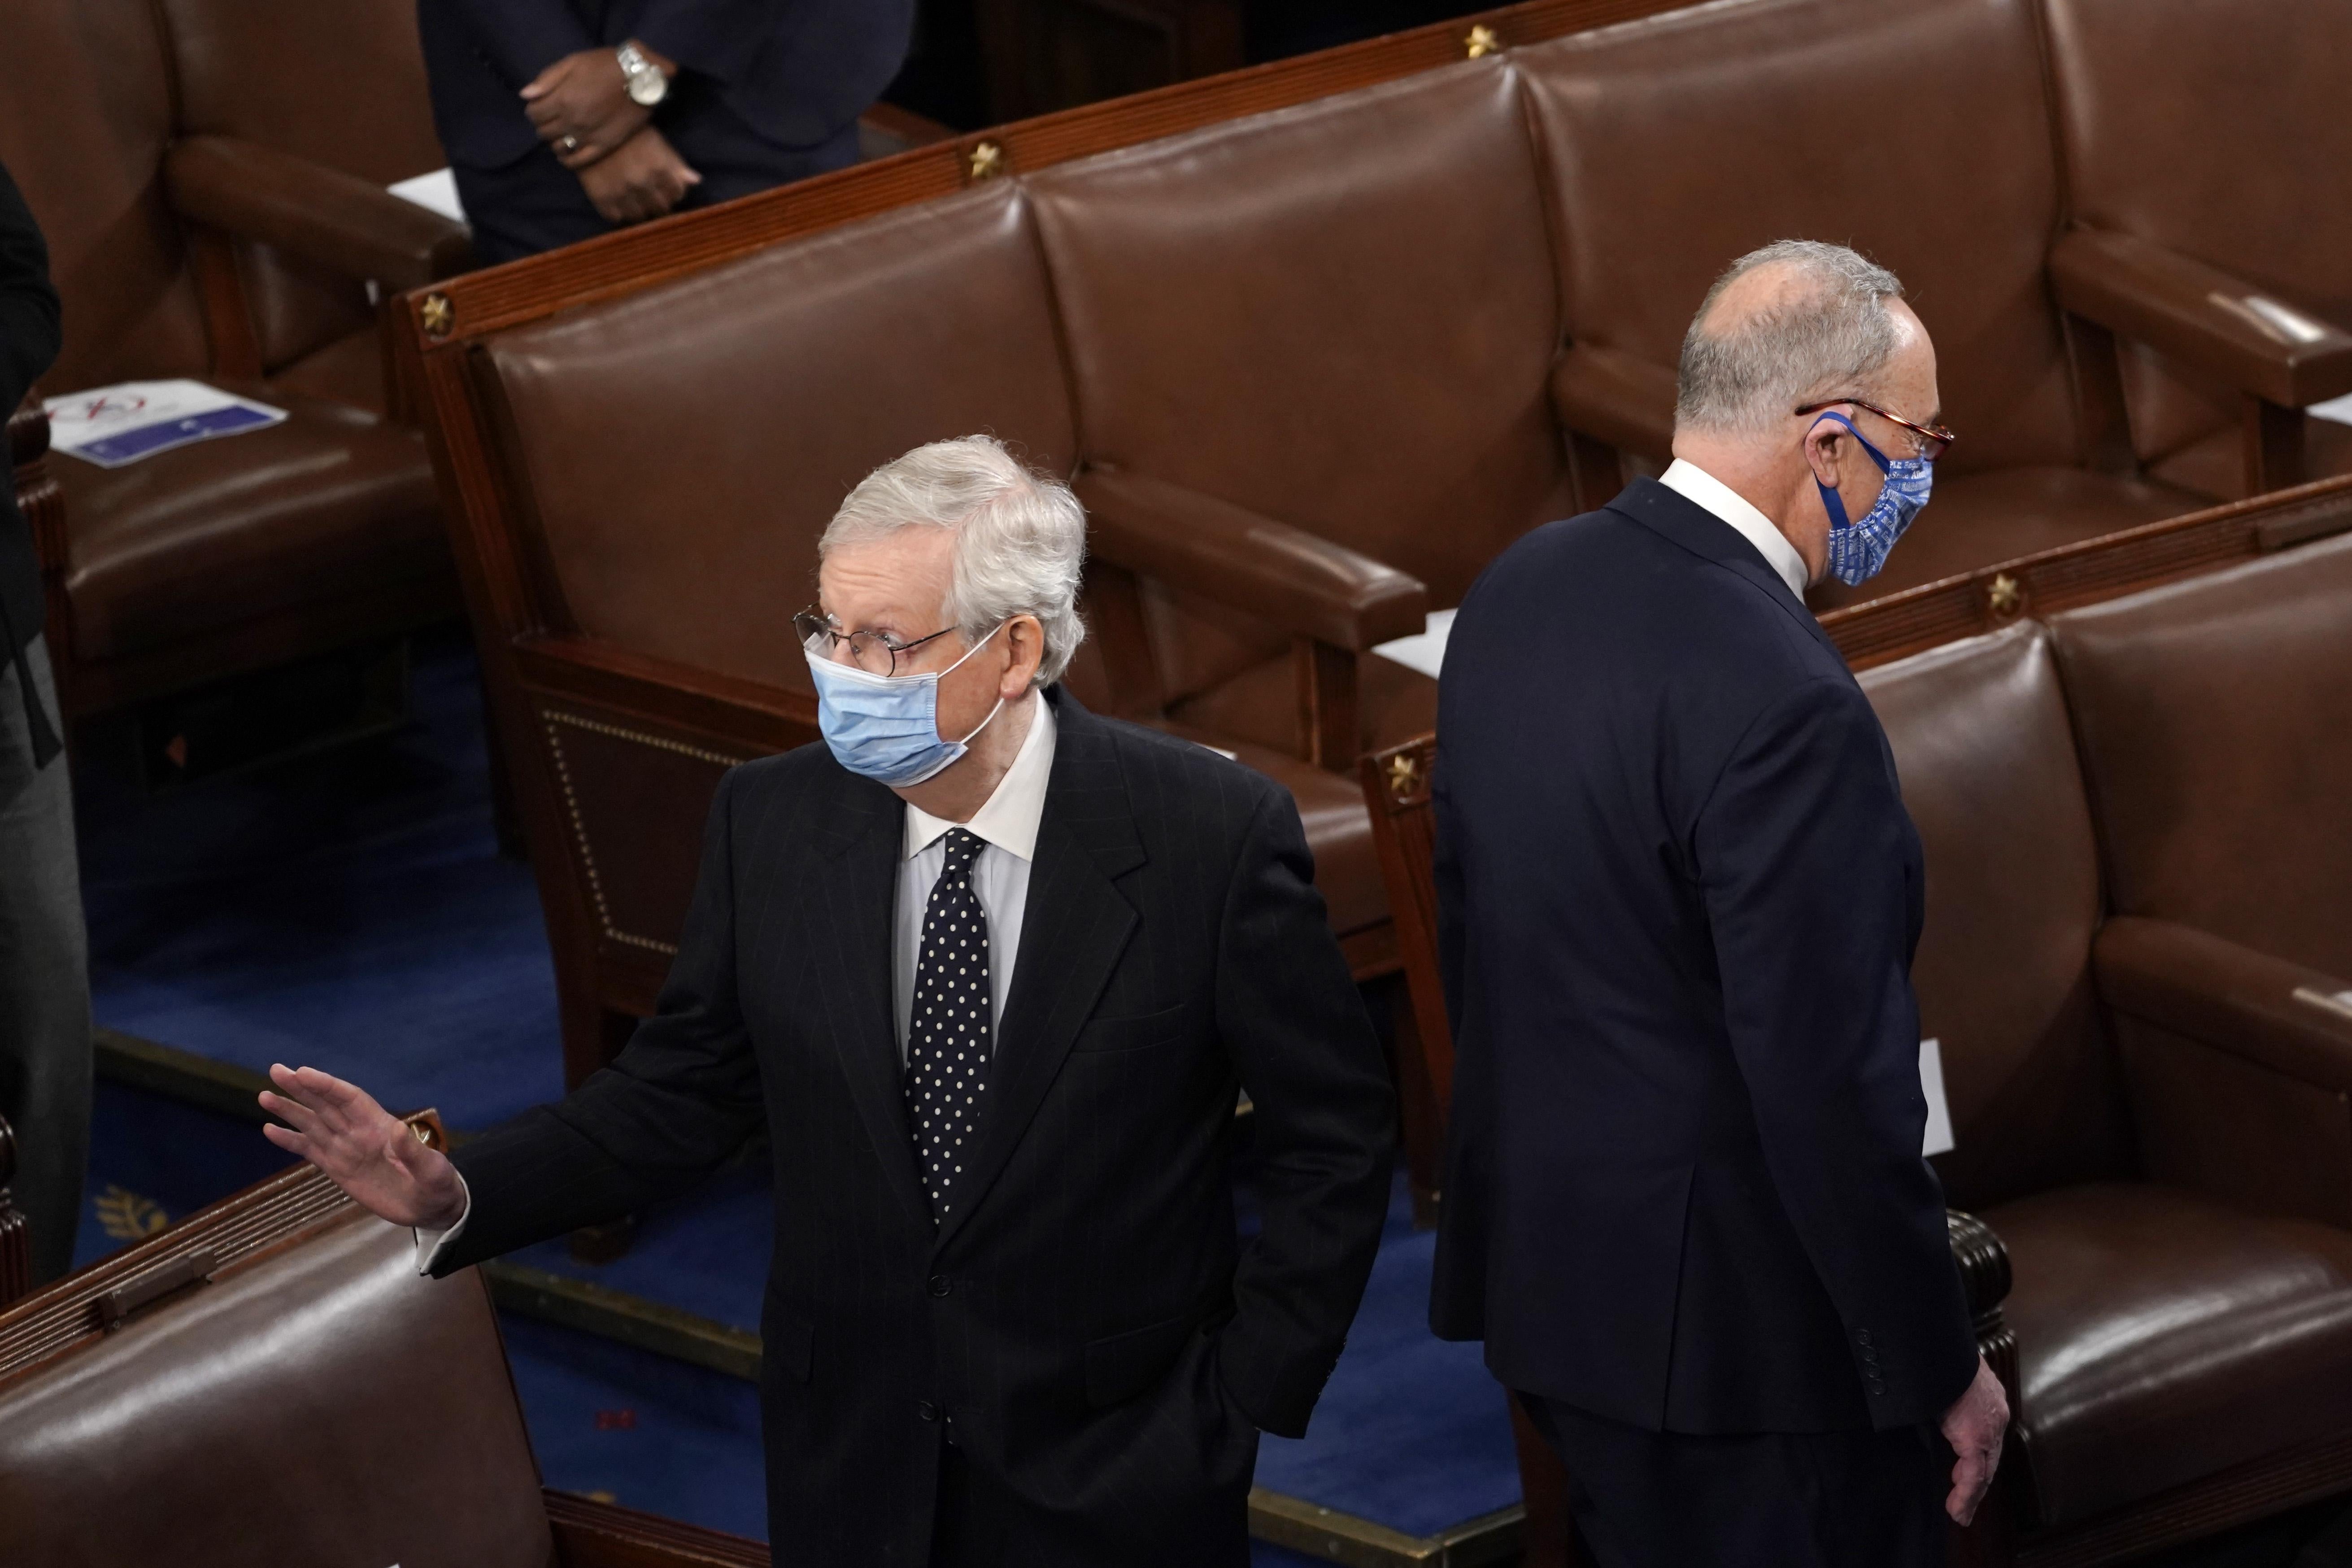 McConnell and Schumer stand back to back in the House chamber